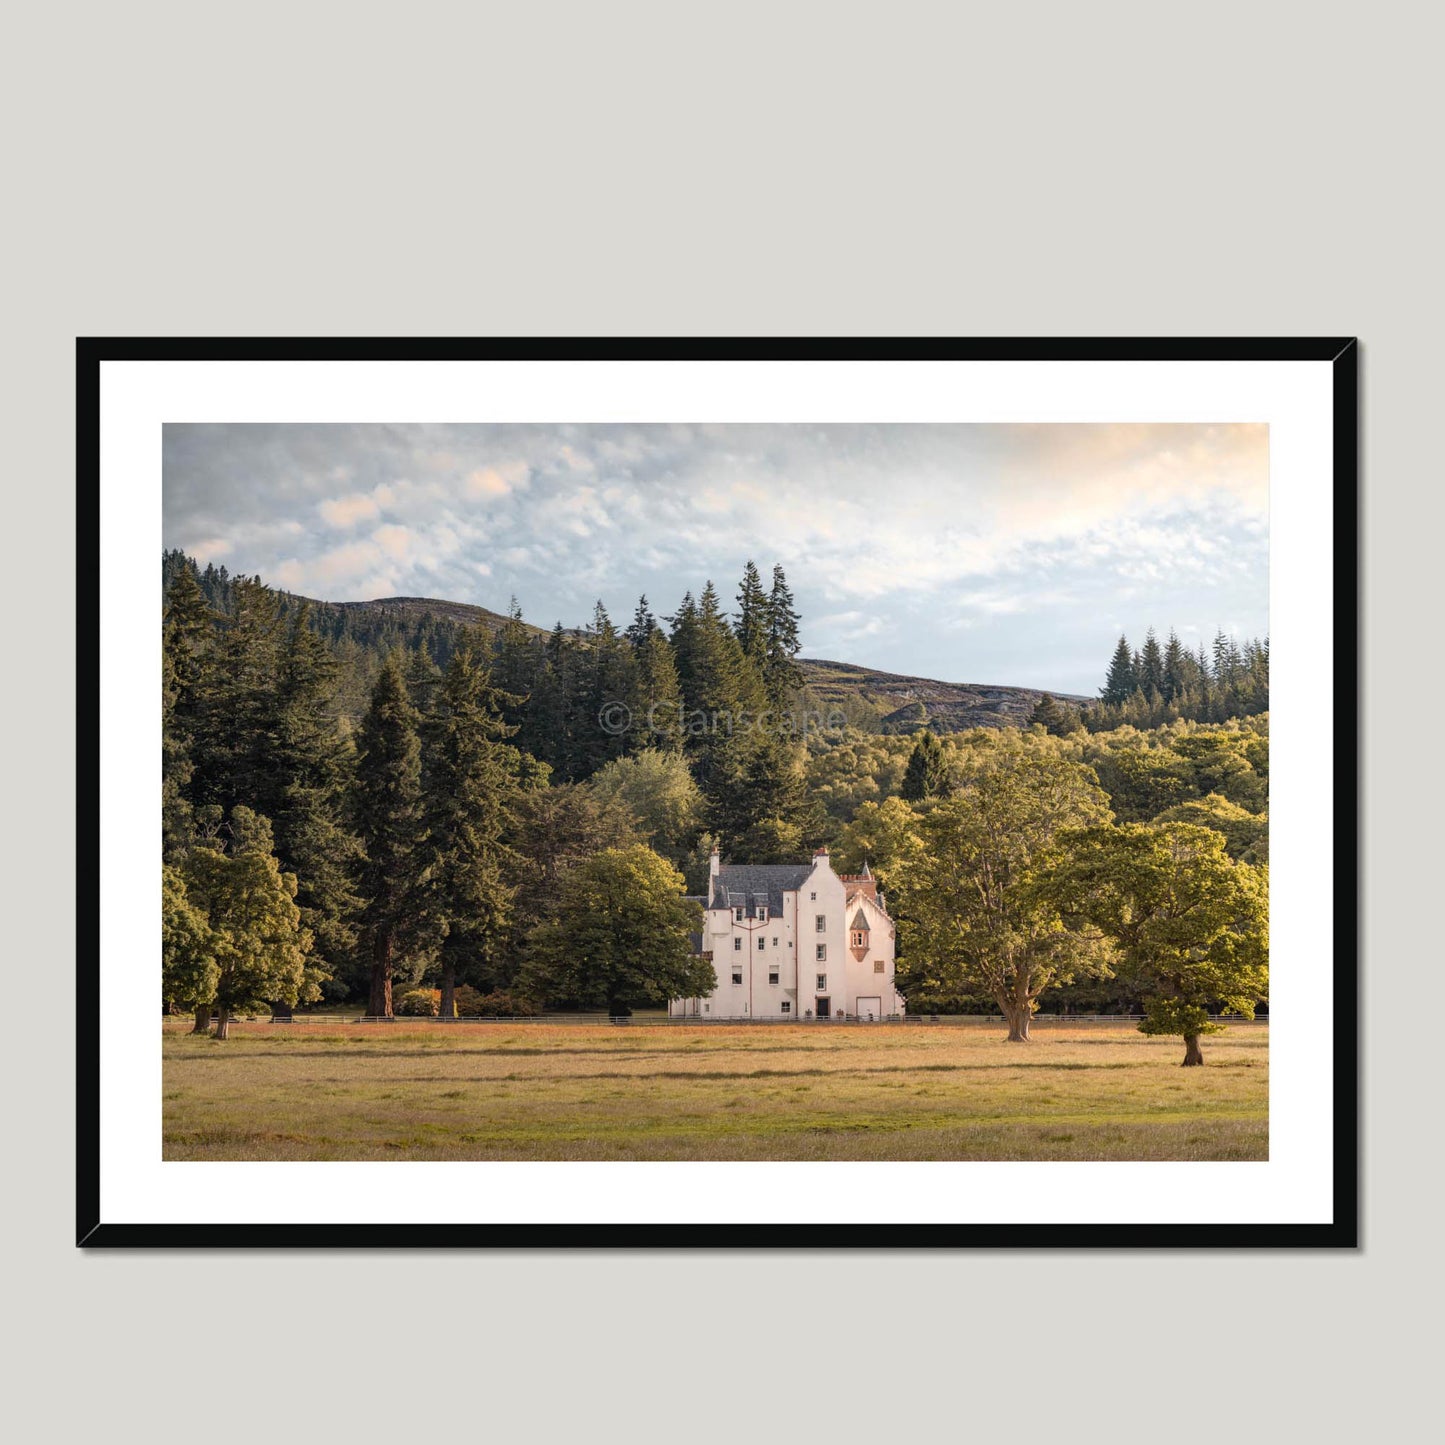 Clan Chisholm - Erchless Castle - Framed & Mounted Photo Print 40"x28" Black